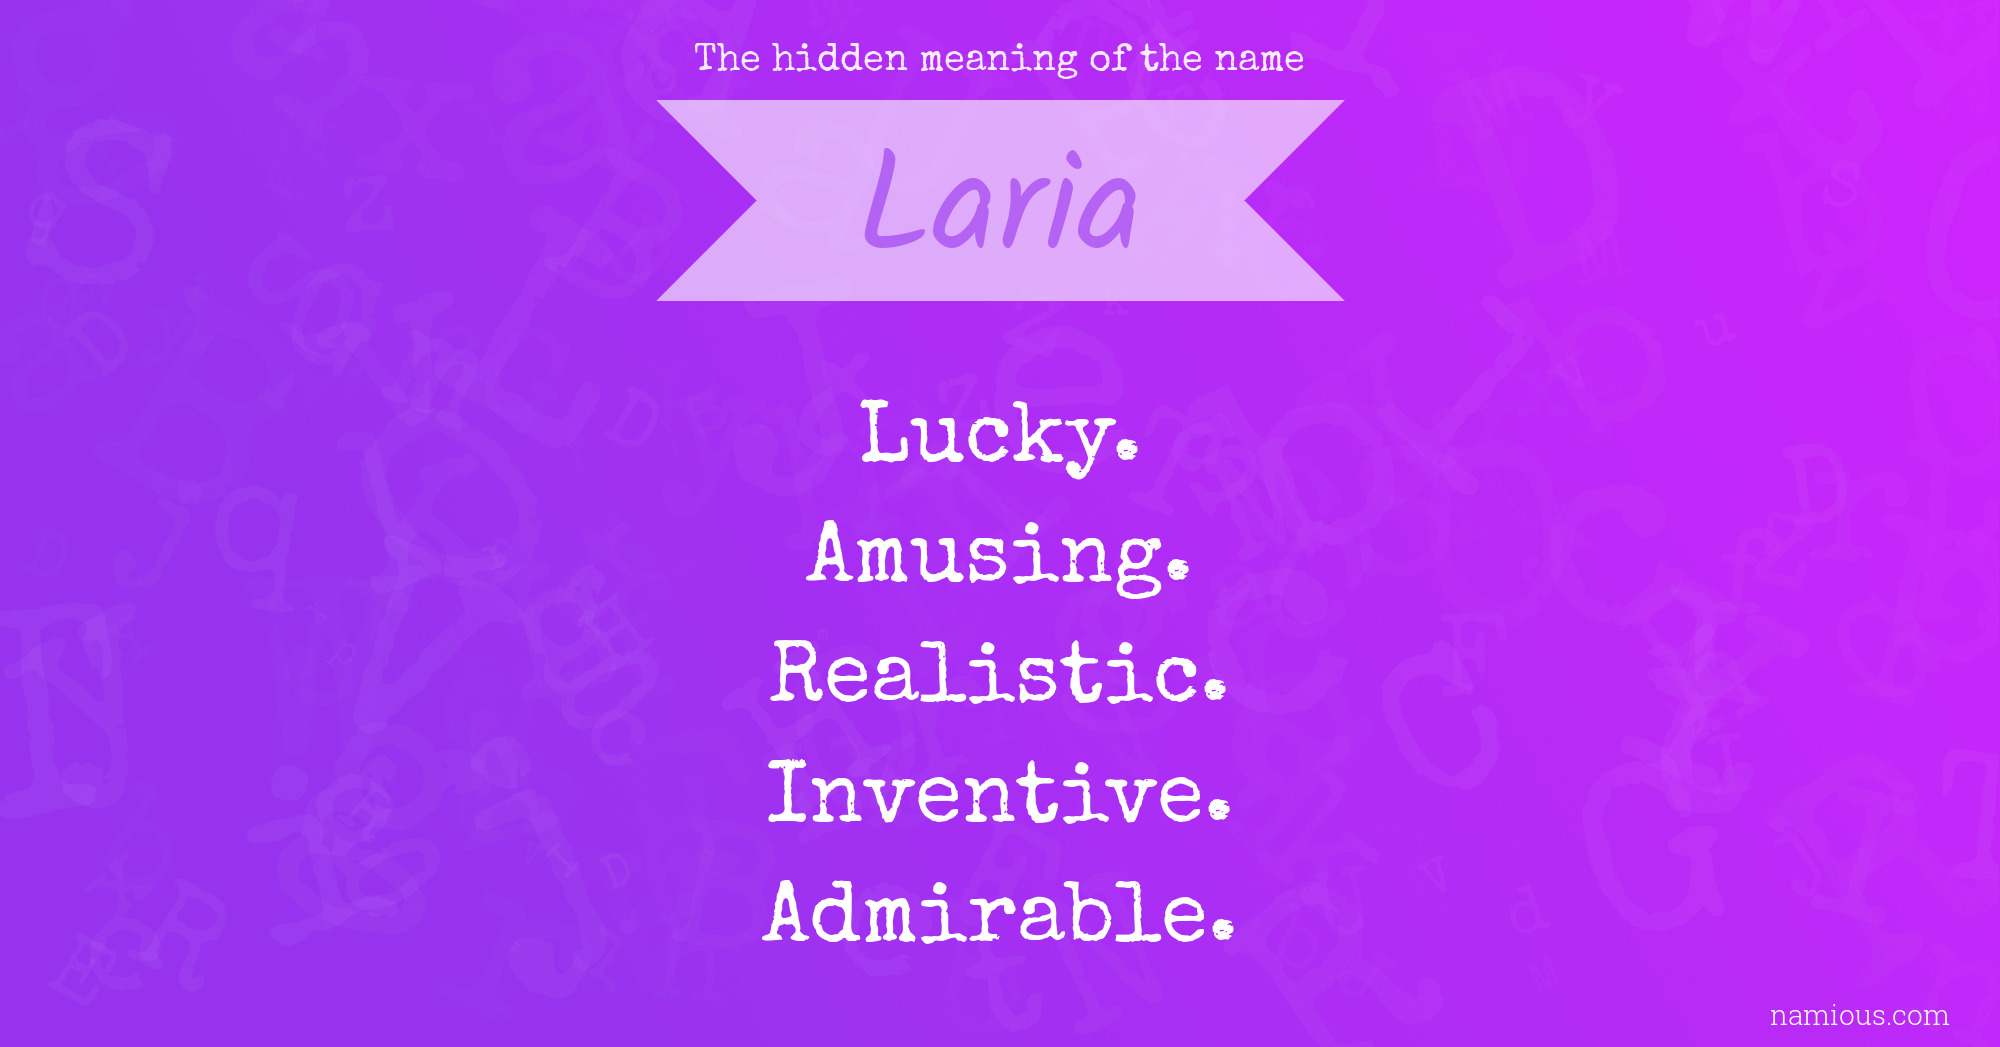 The hidden meaning of the name Laria